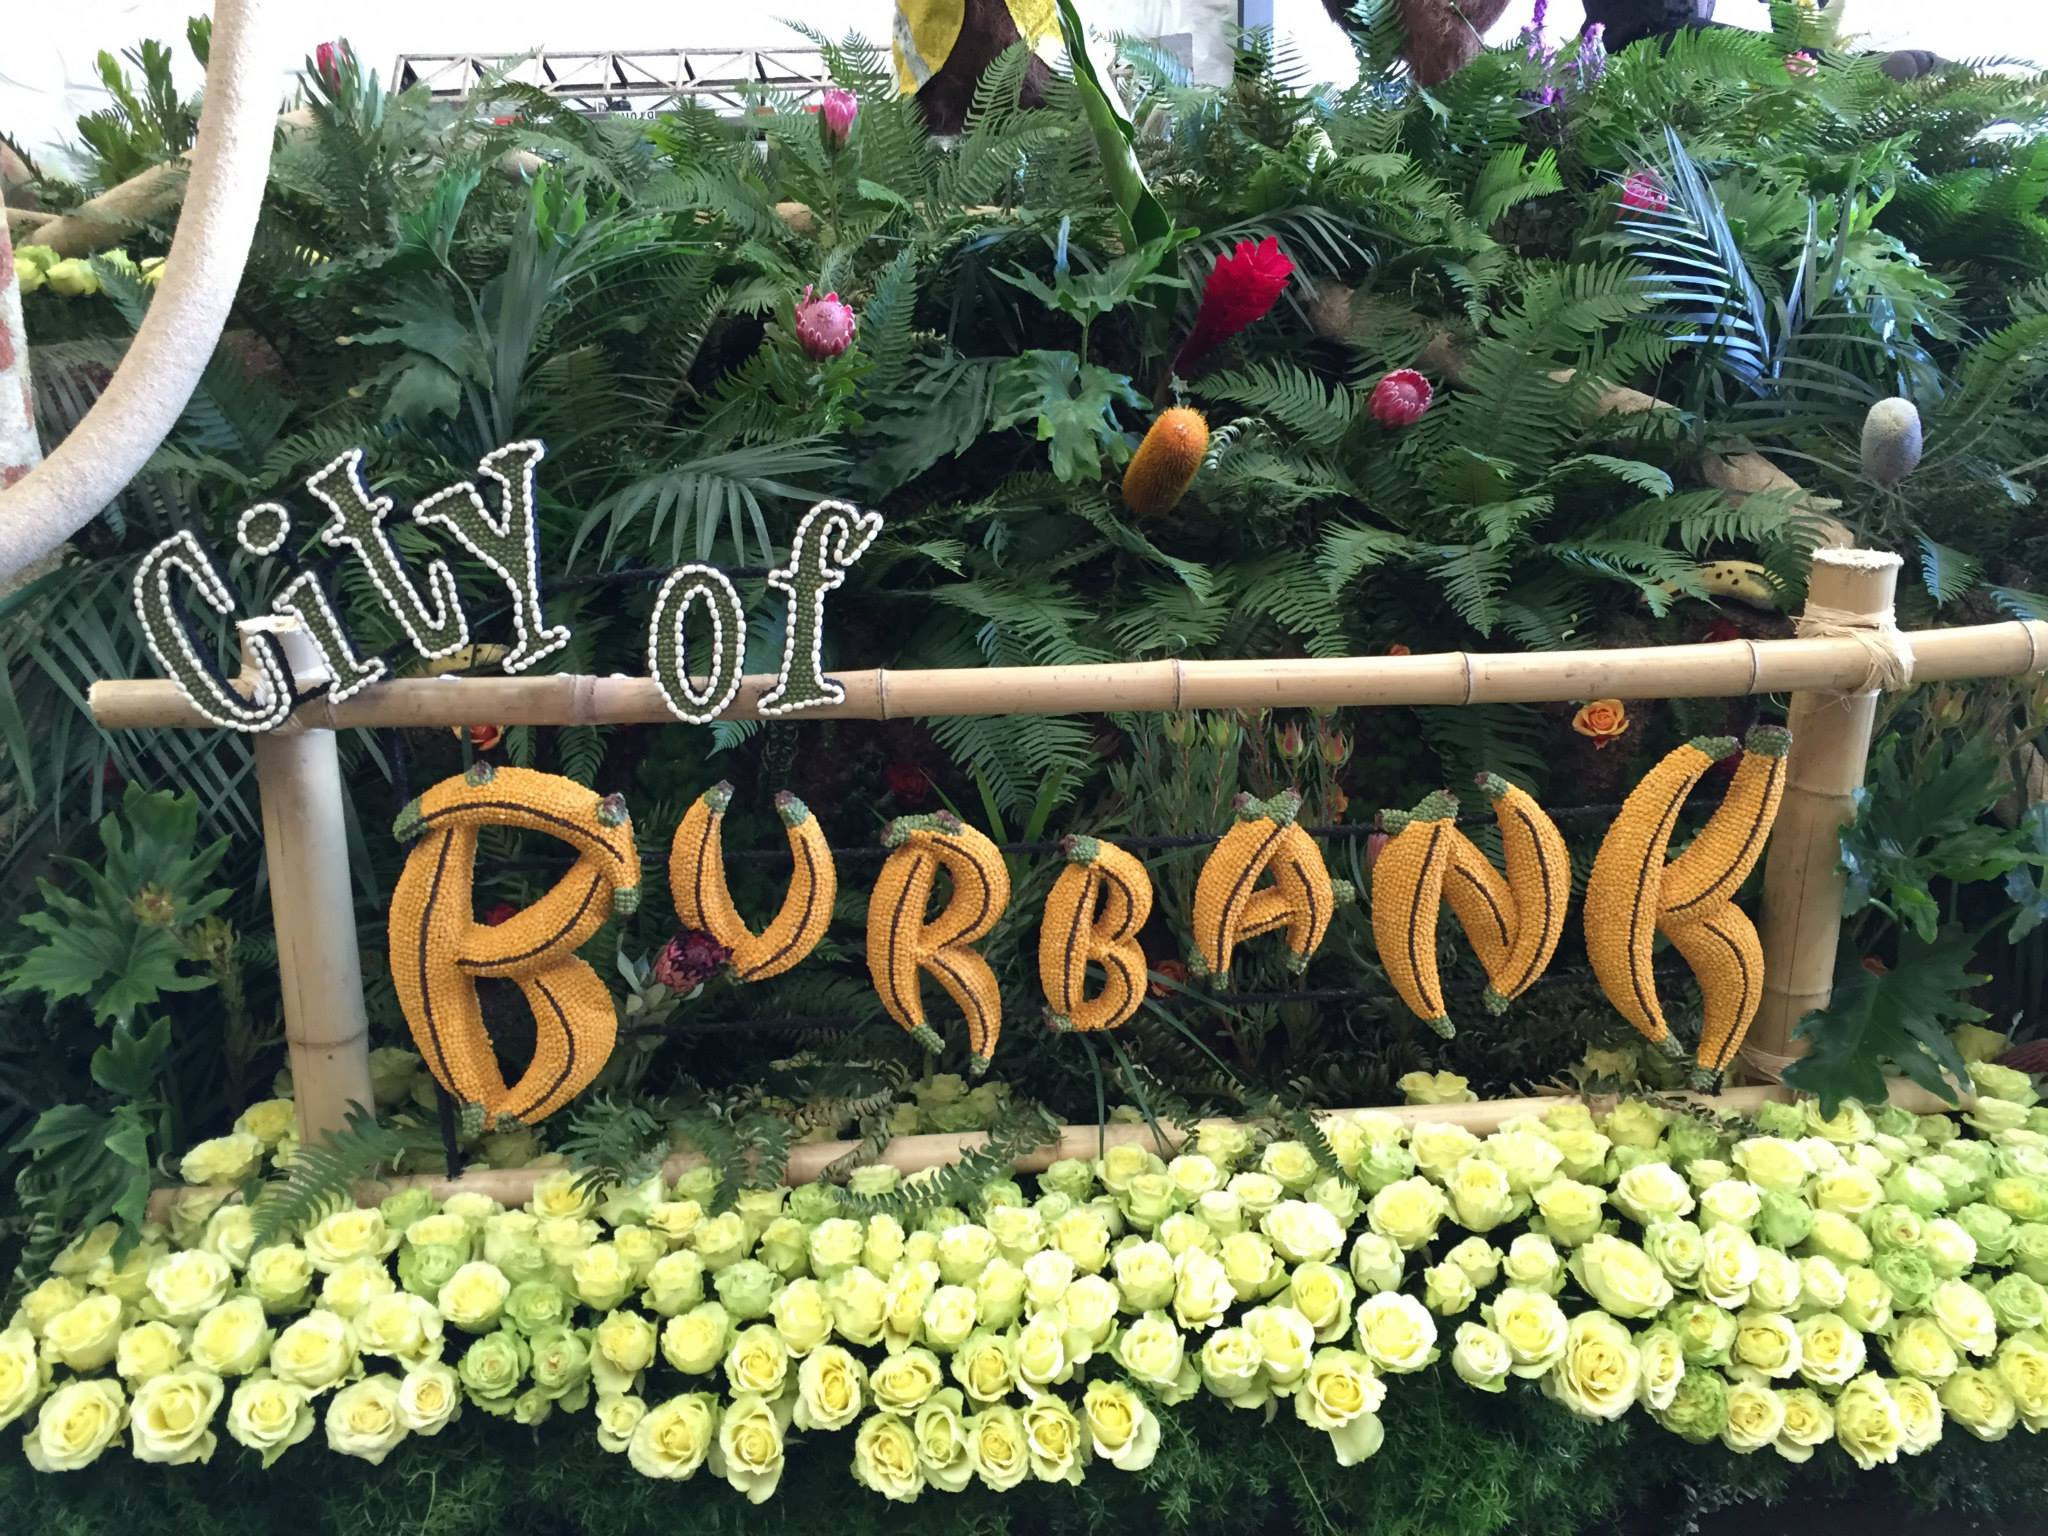 burbank-tournament-of-roses-float-with-flyboy-naturals-rose-petals.1.1.2015.1.jpg